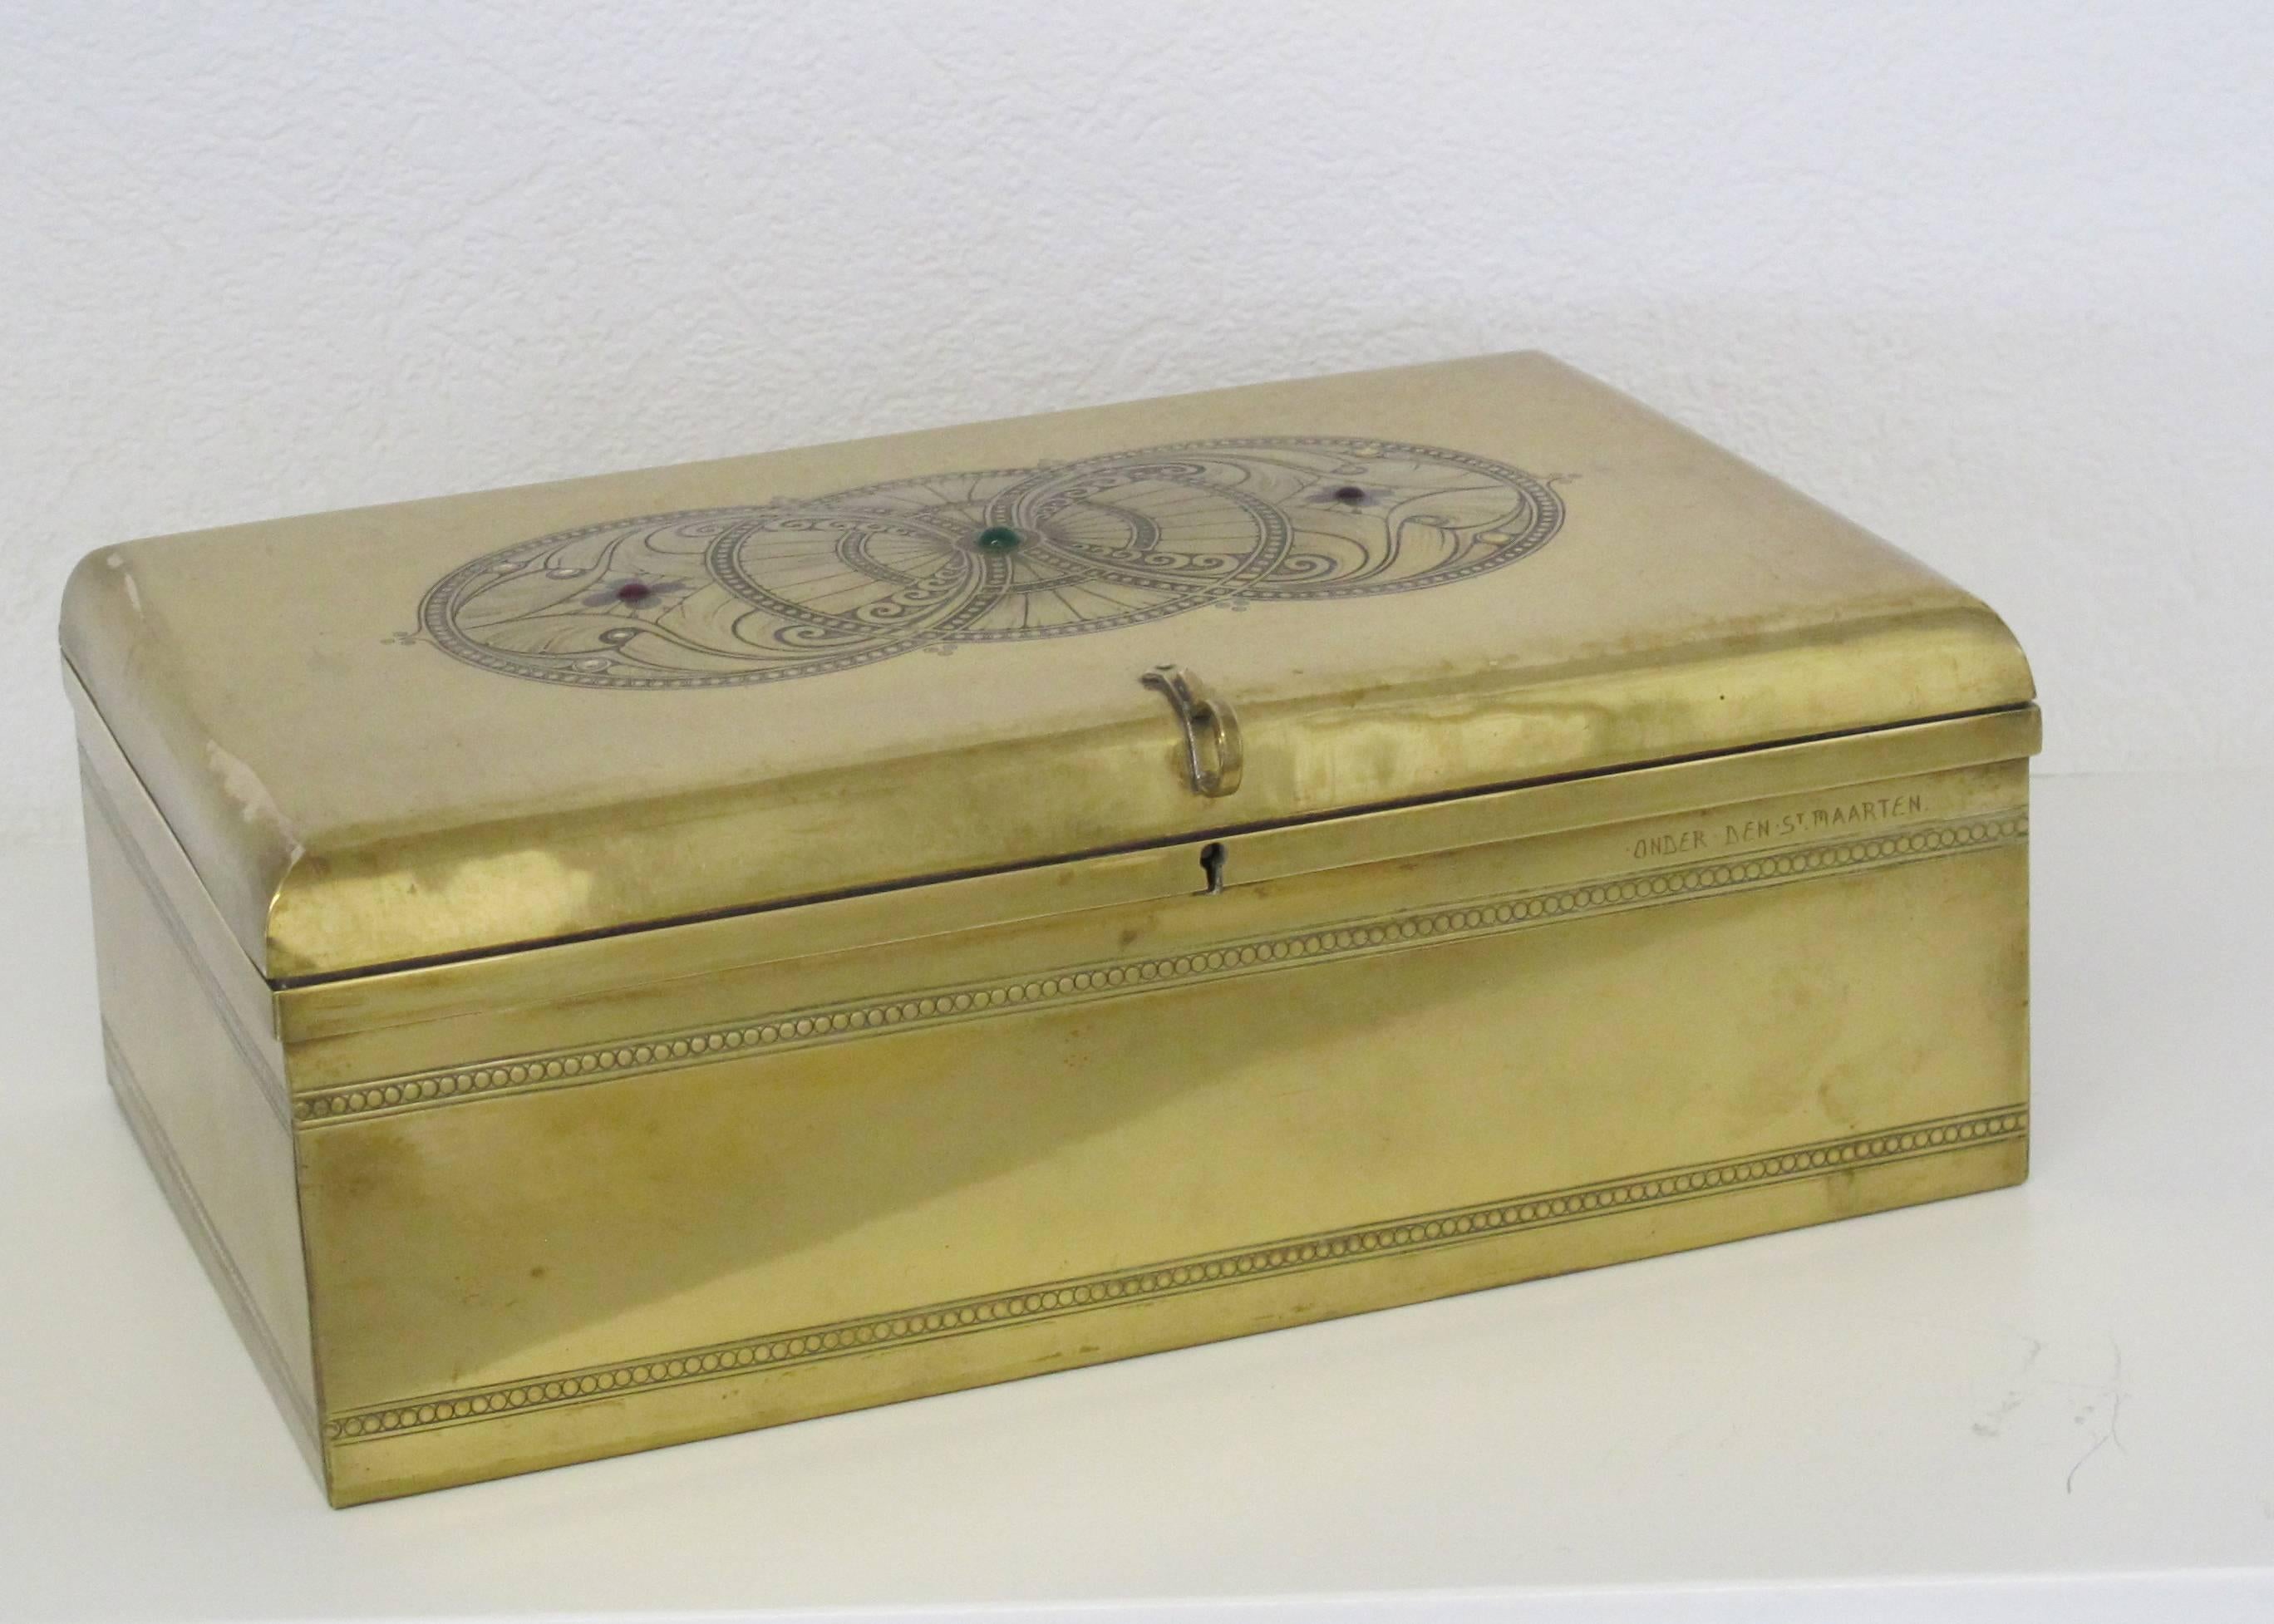 This solid brass chest was designed bij J.C. Stoffels and produced at the furniture factory Onder den Sint Maarten, circa 1905. The sides of the box are adorned by two rows of circles encapsulated between double lines. The top of the box is